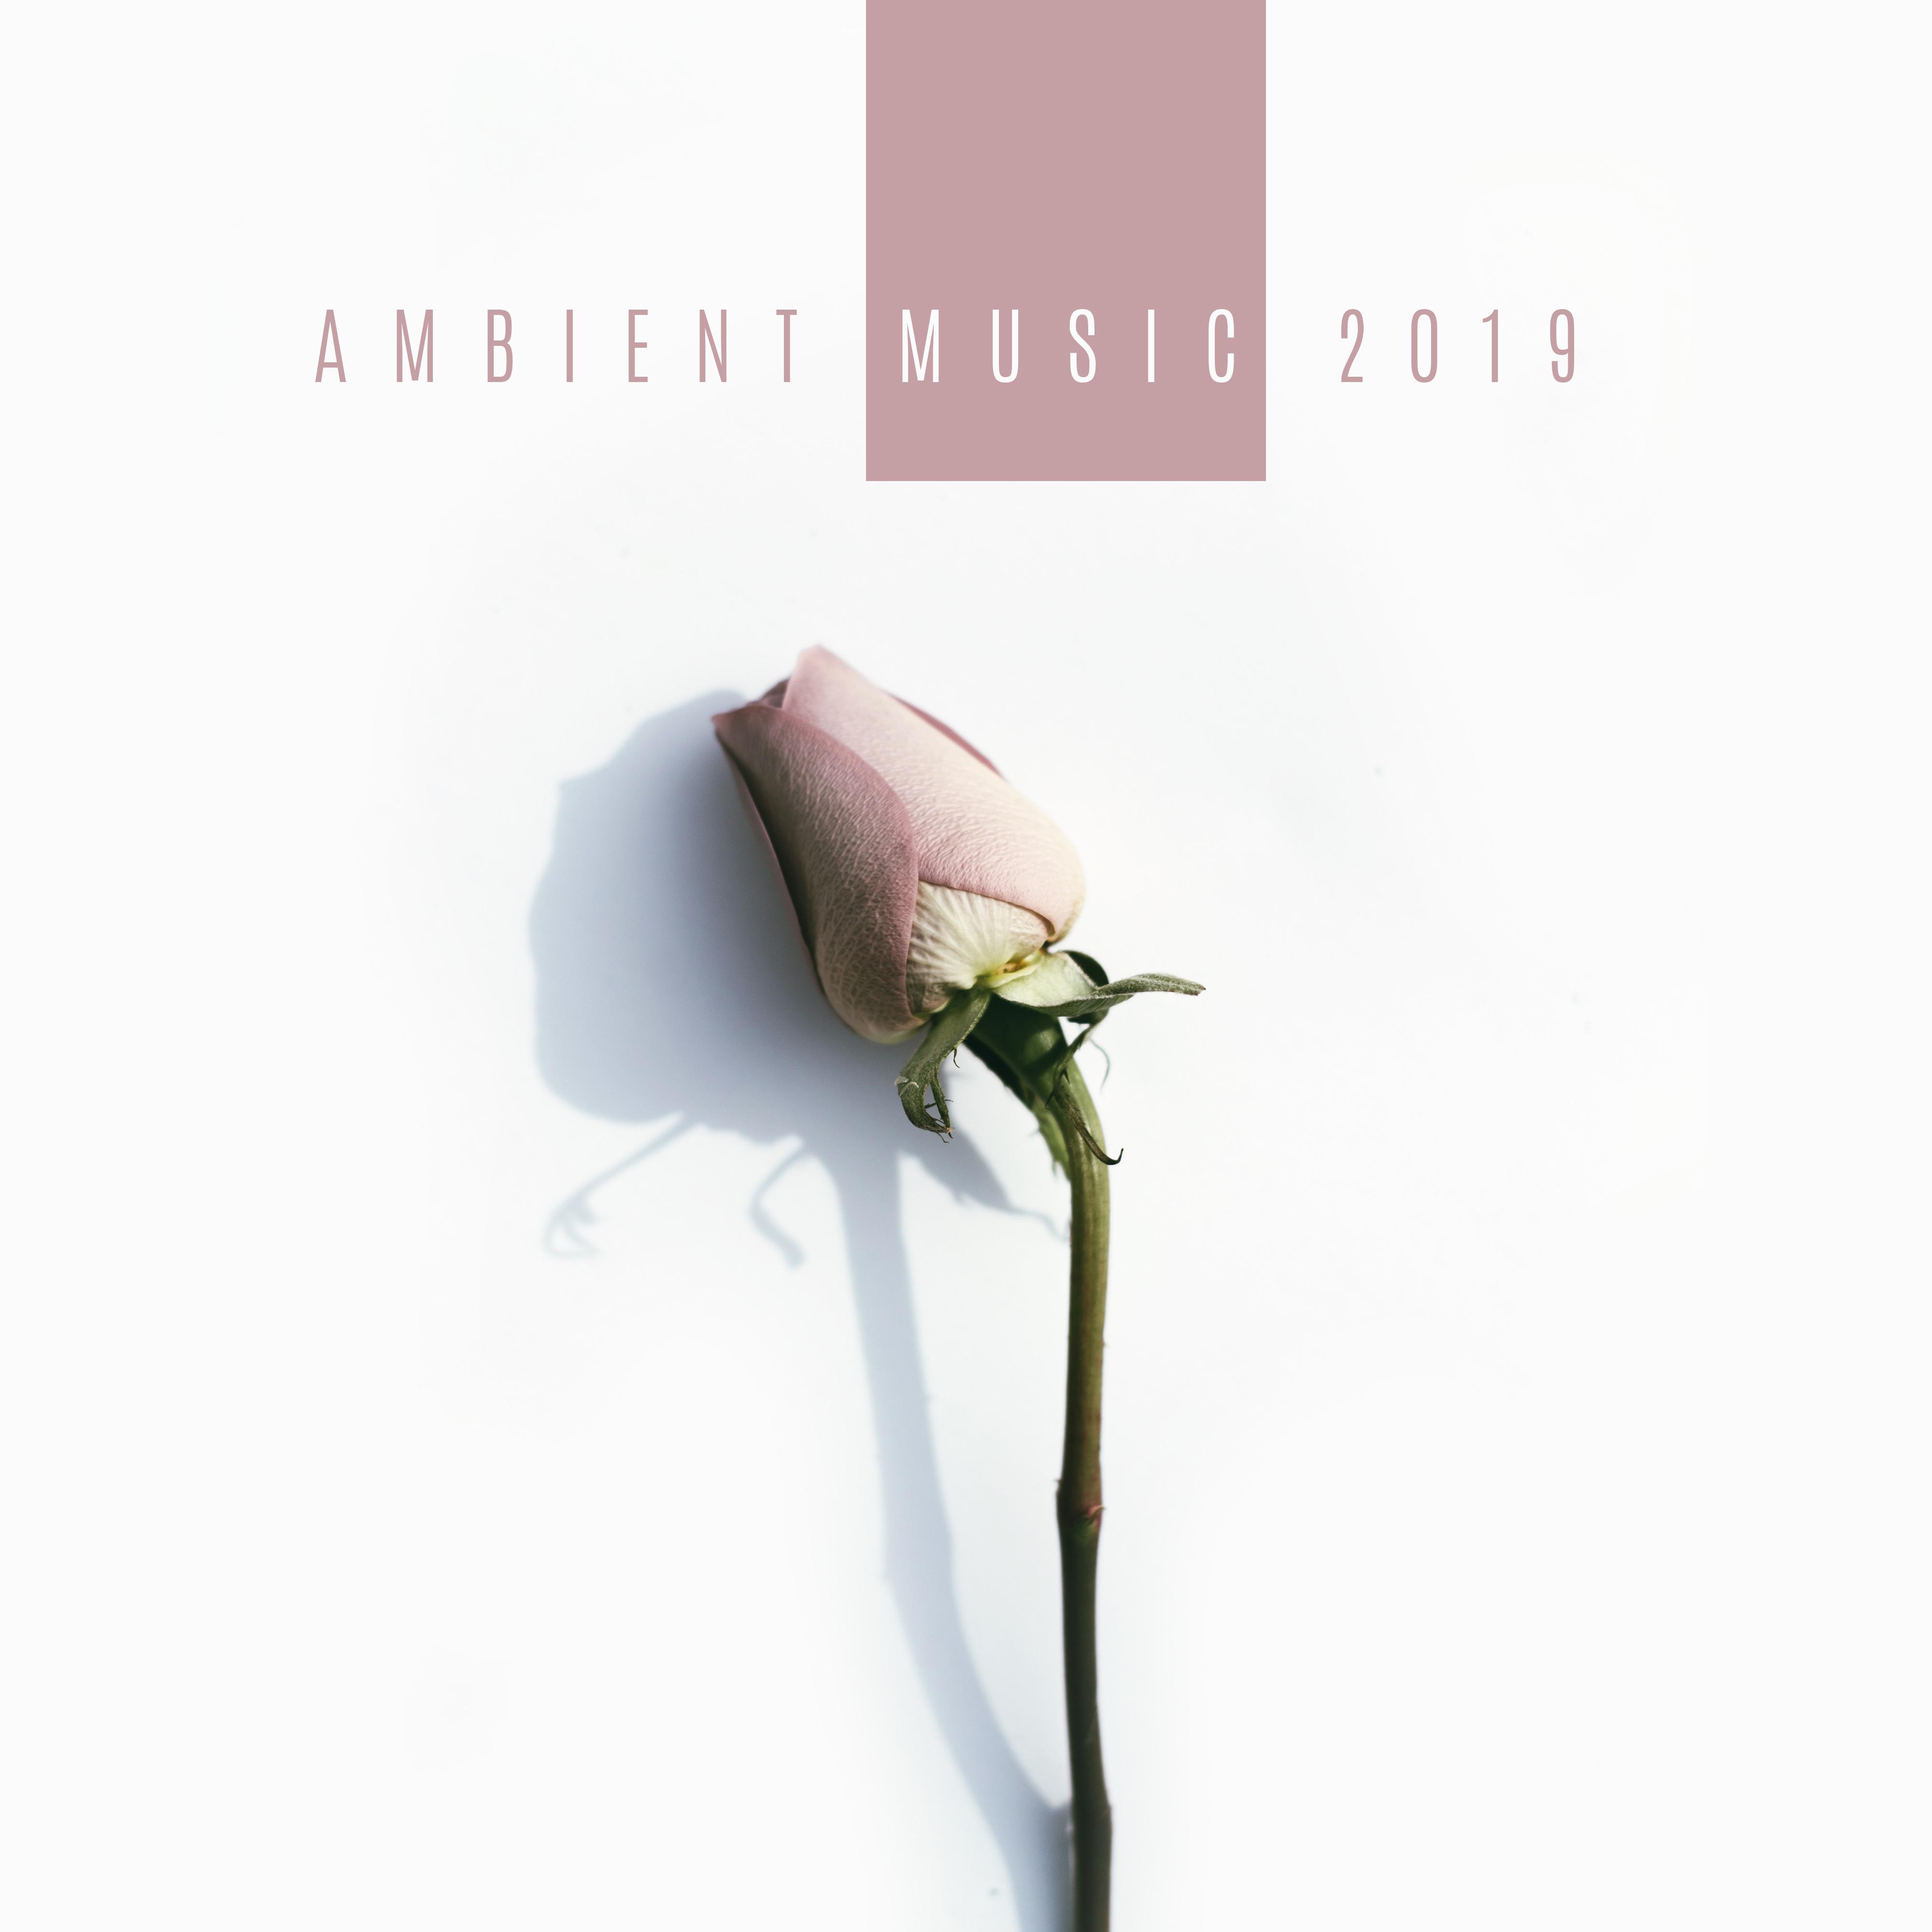 Ambient Music 2019  Calming Sounds for Yoga, Meditation, Relaxation, Sleep, Massage, Zen, Lounge Music, Relaxing Music Therapy, Music Zone, Nature Sounds